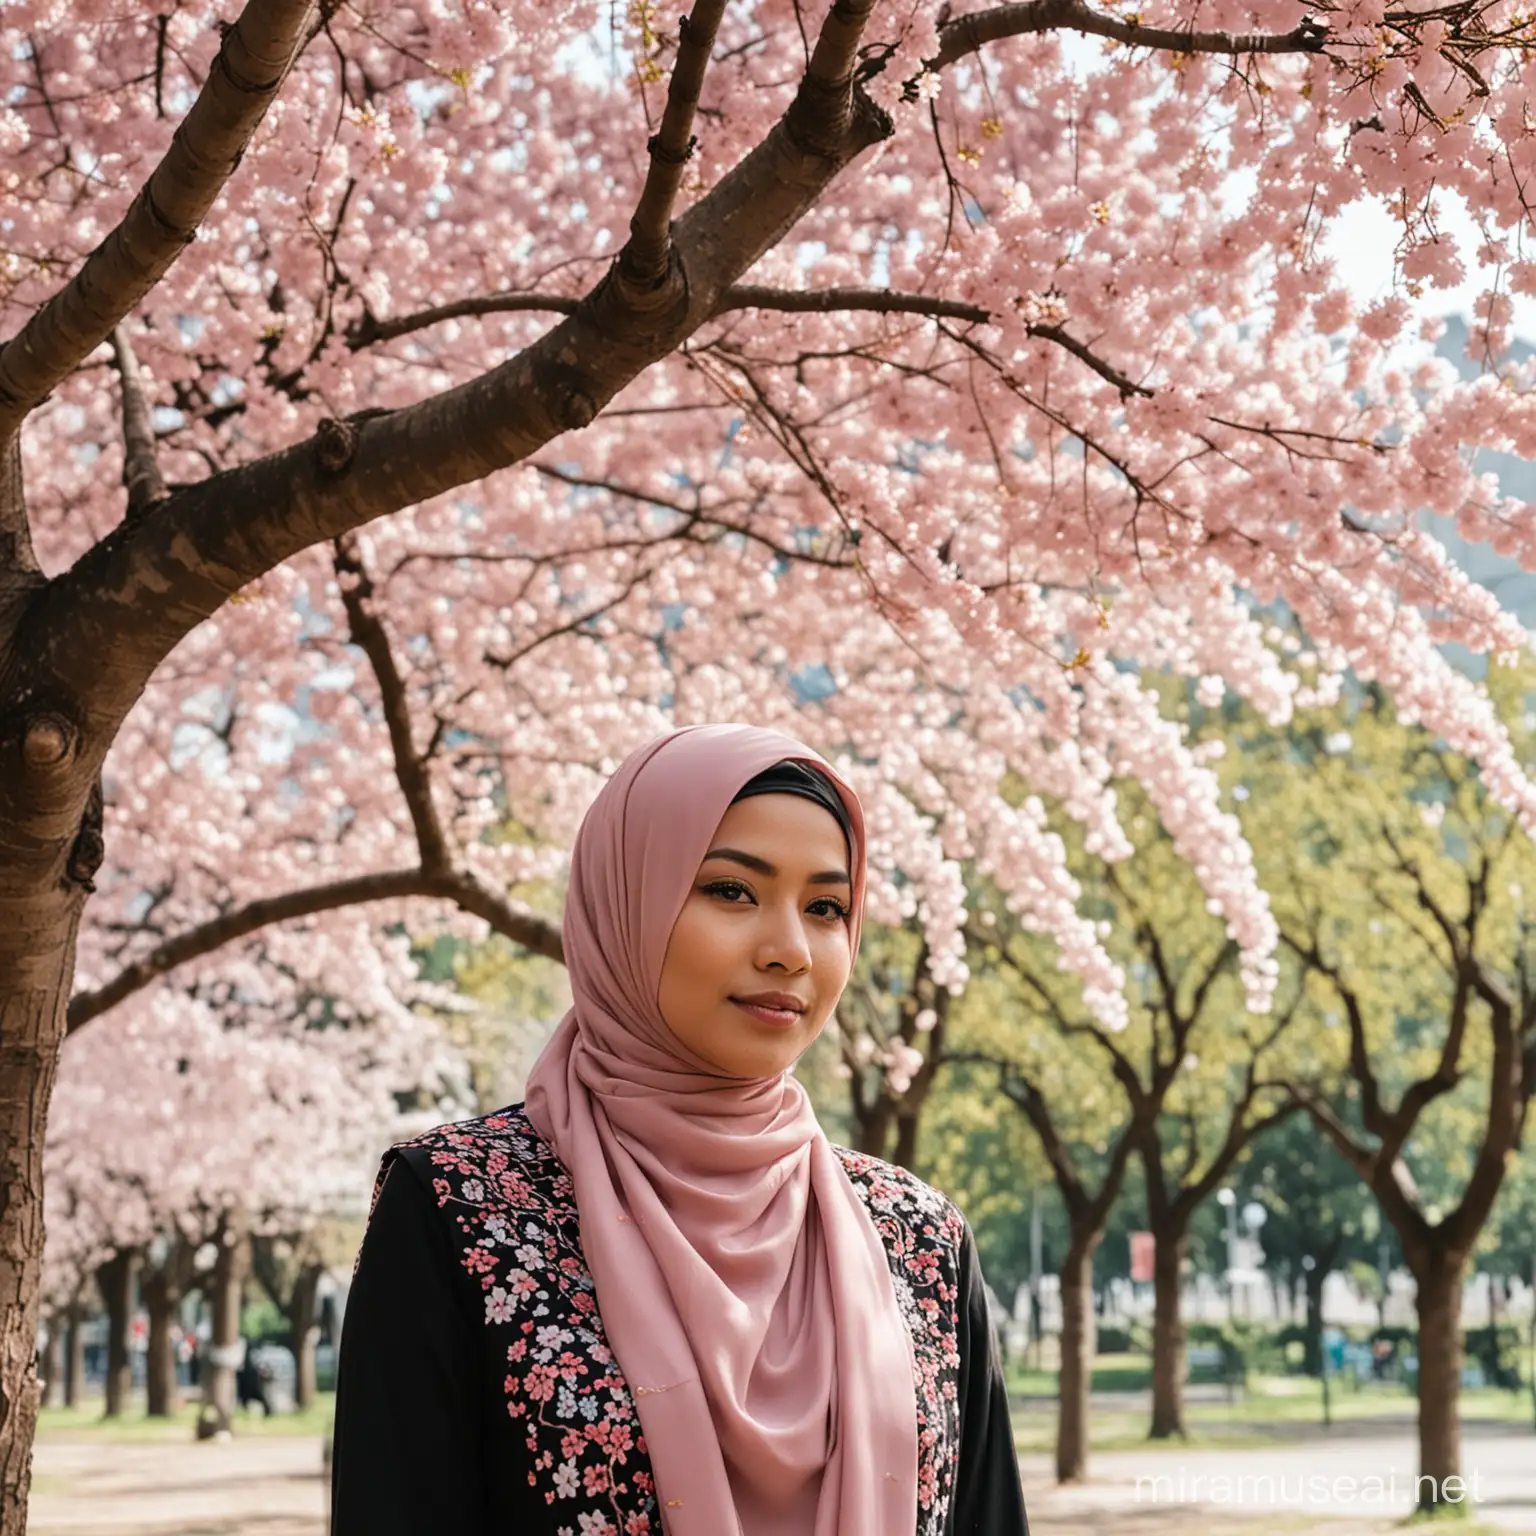 Indonesian Woman in Hijab Standing under Cherry Blossom Tree